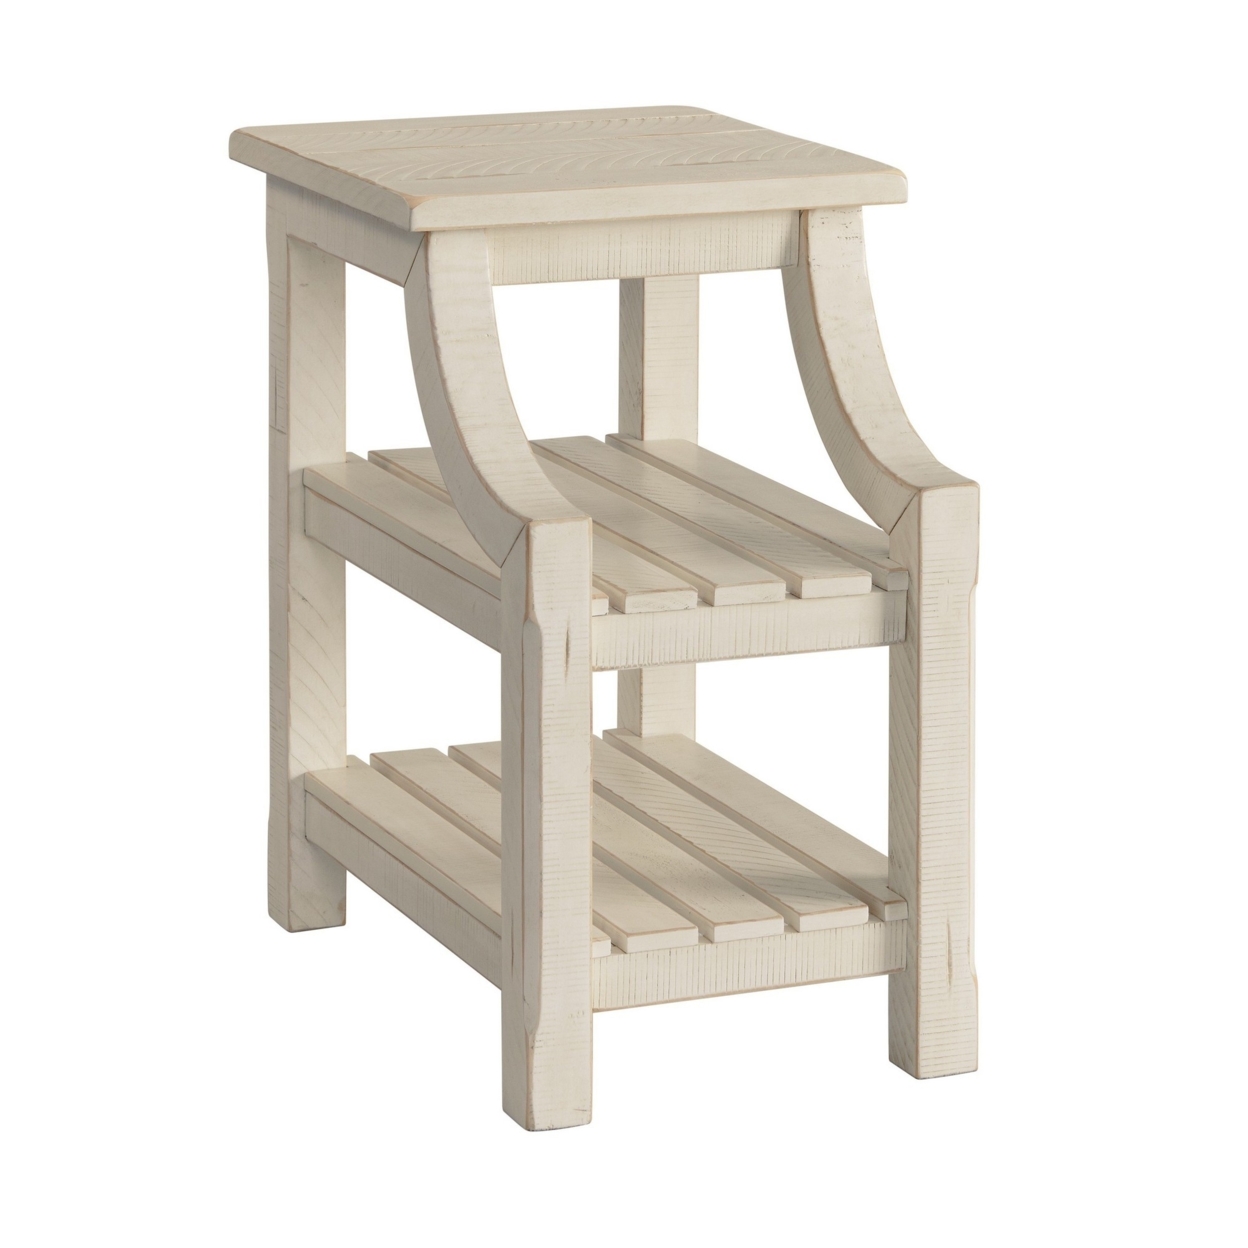 Chairside Table With 2 Slatted Shelves And Chiseled Edges, White- Saltoro Sherpi